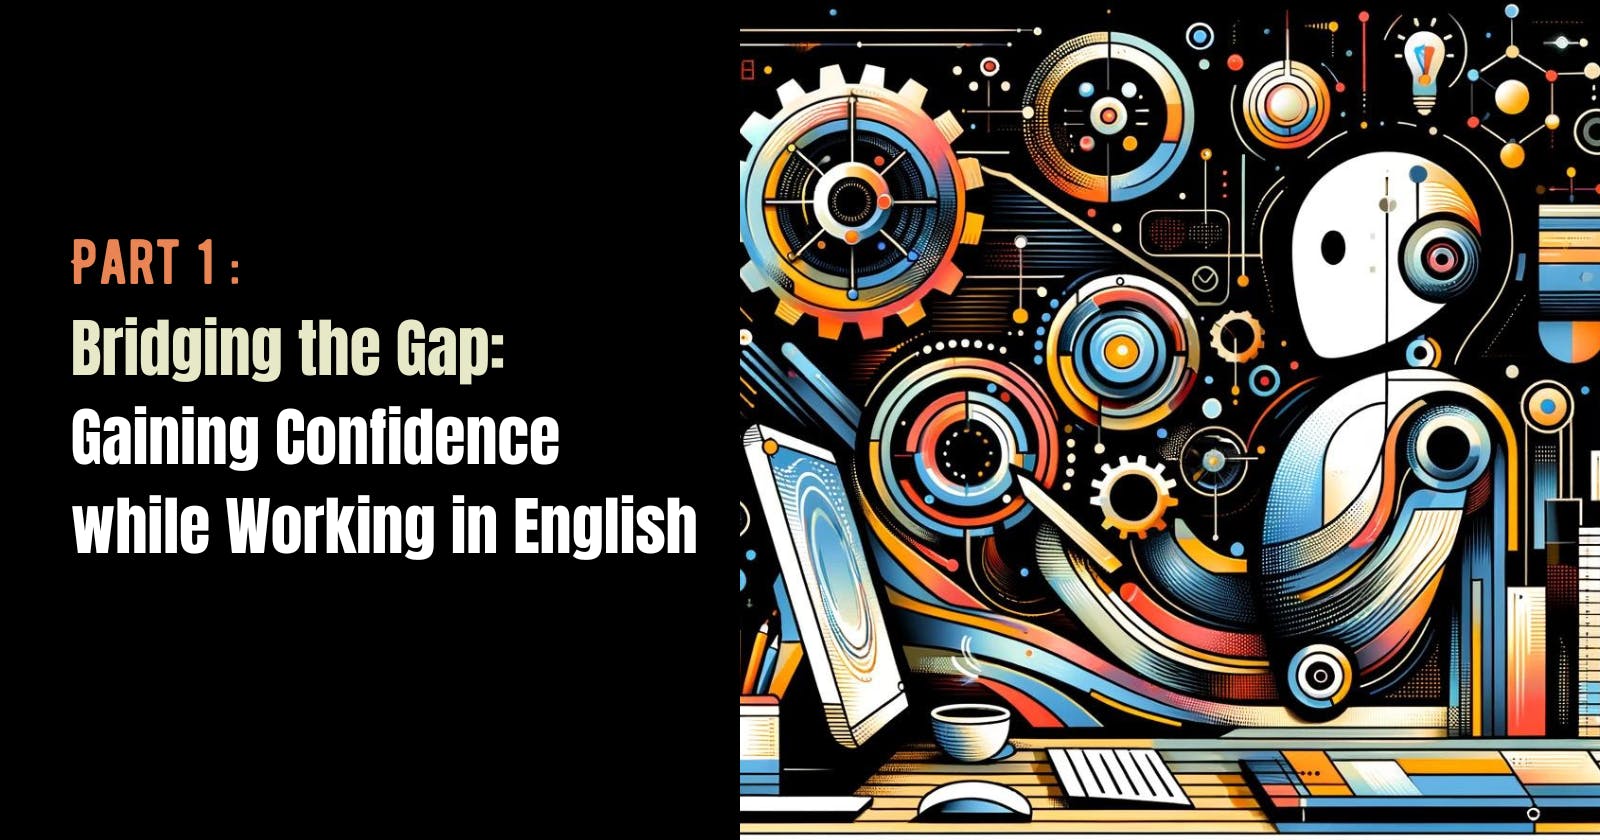 Bridging the Gap: Gaining Confidence while Working in English